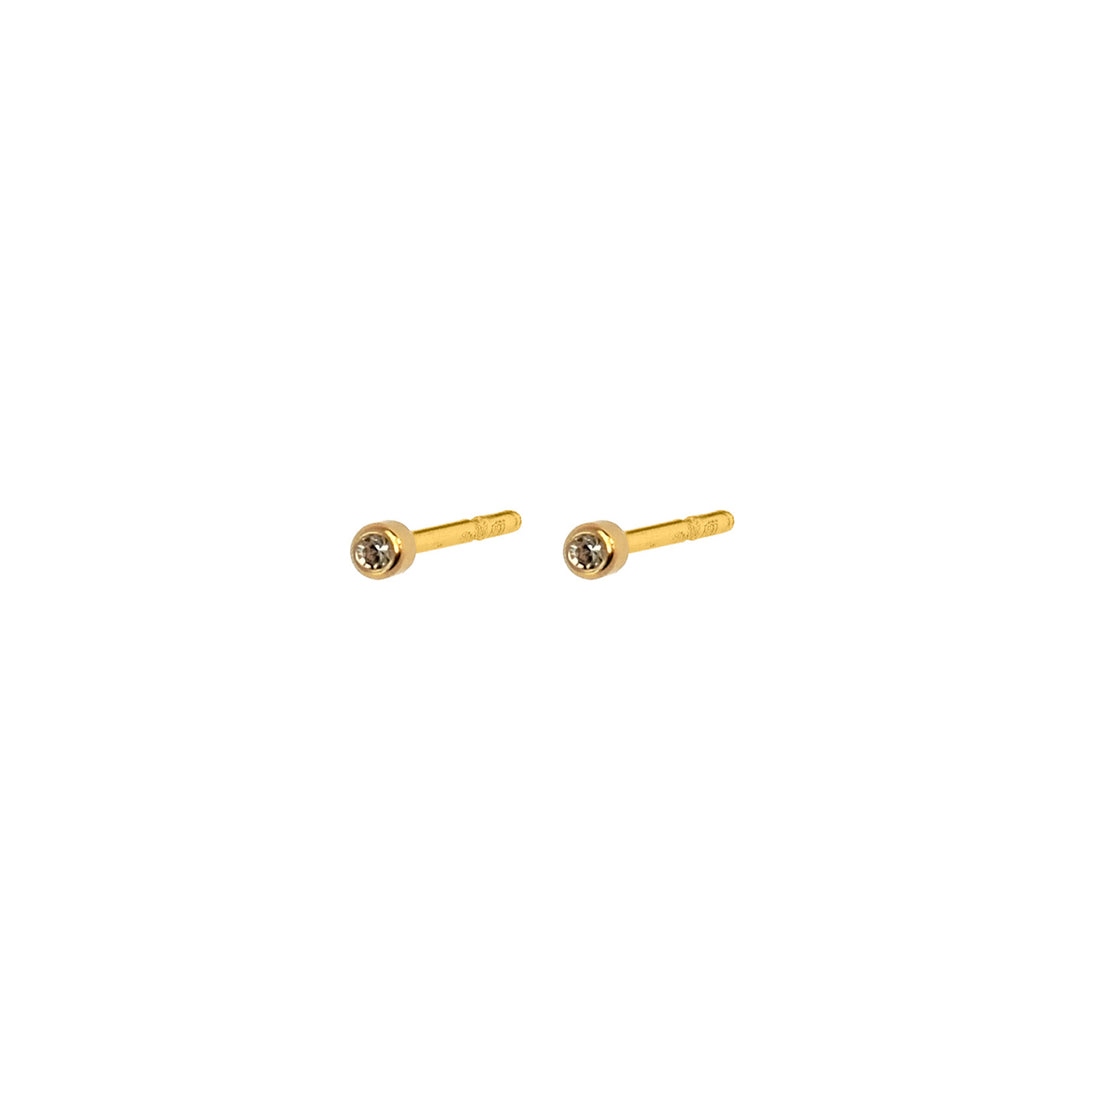 PIERCING STUDIO: Pilgrim Ear Stud for Piercing with Stone Gold Plated